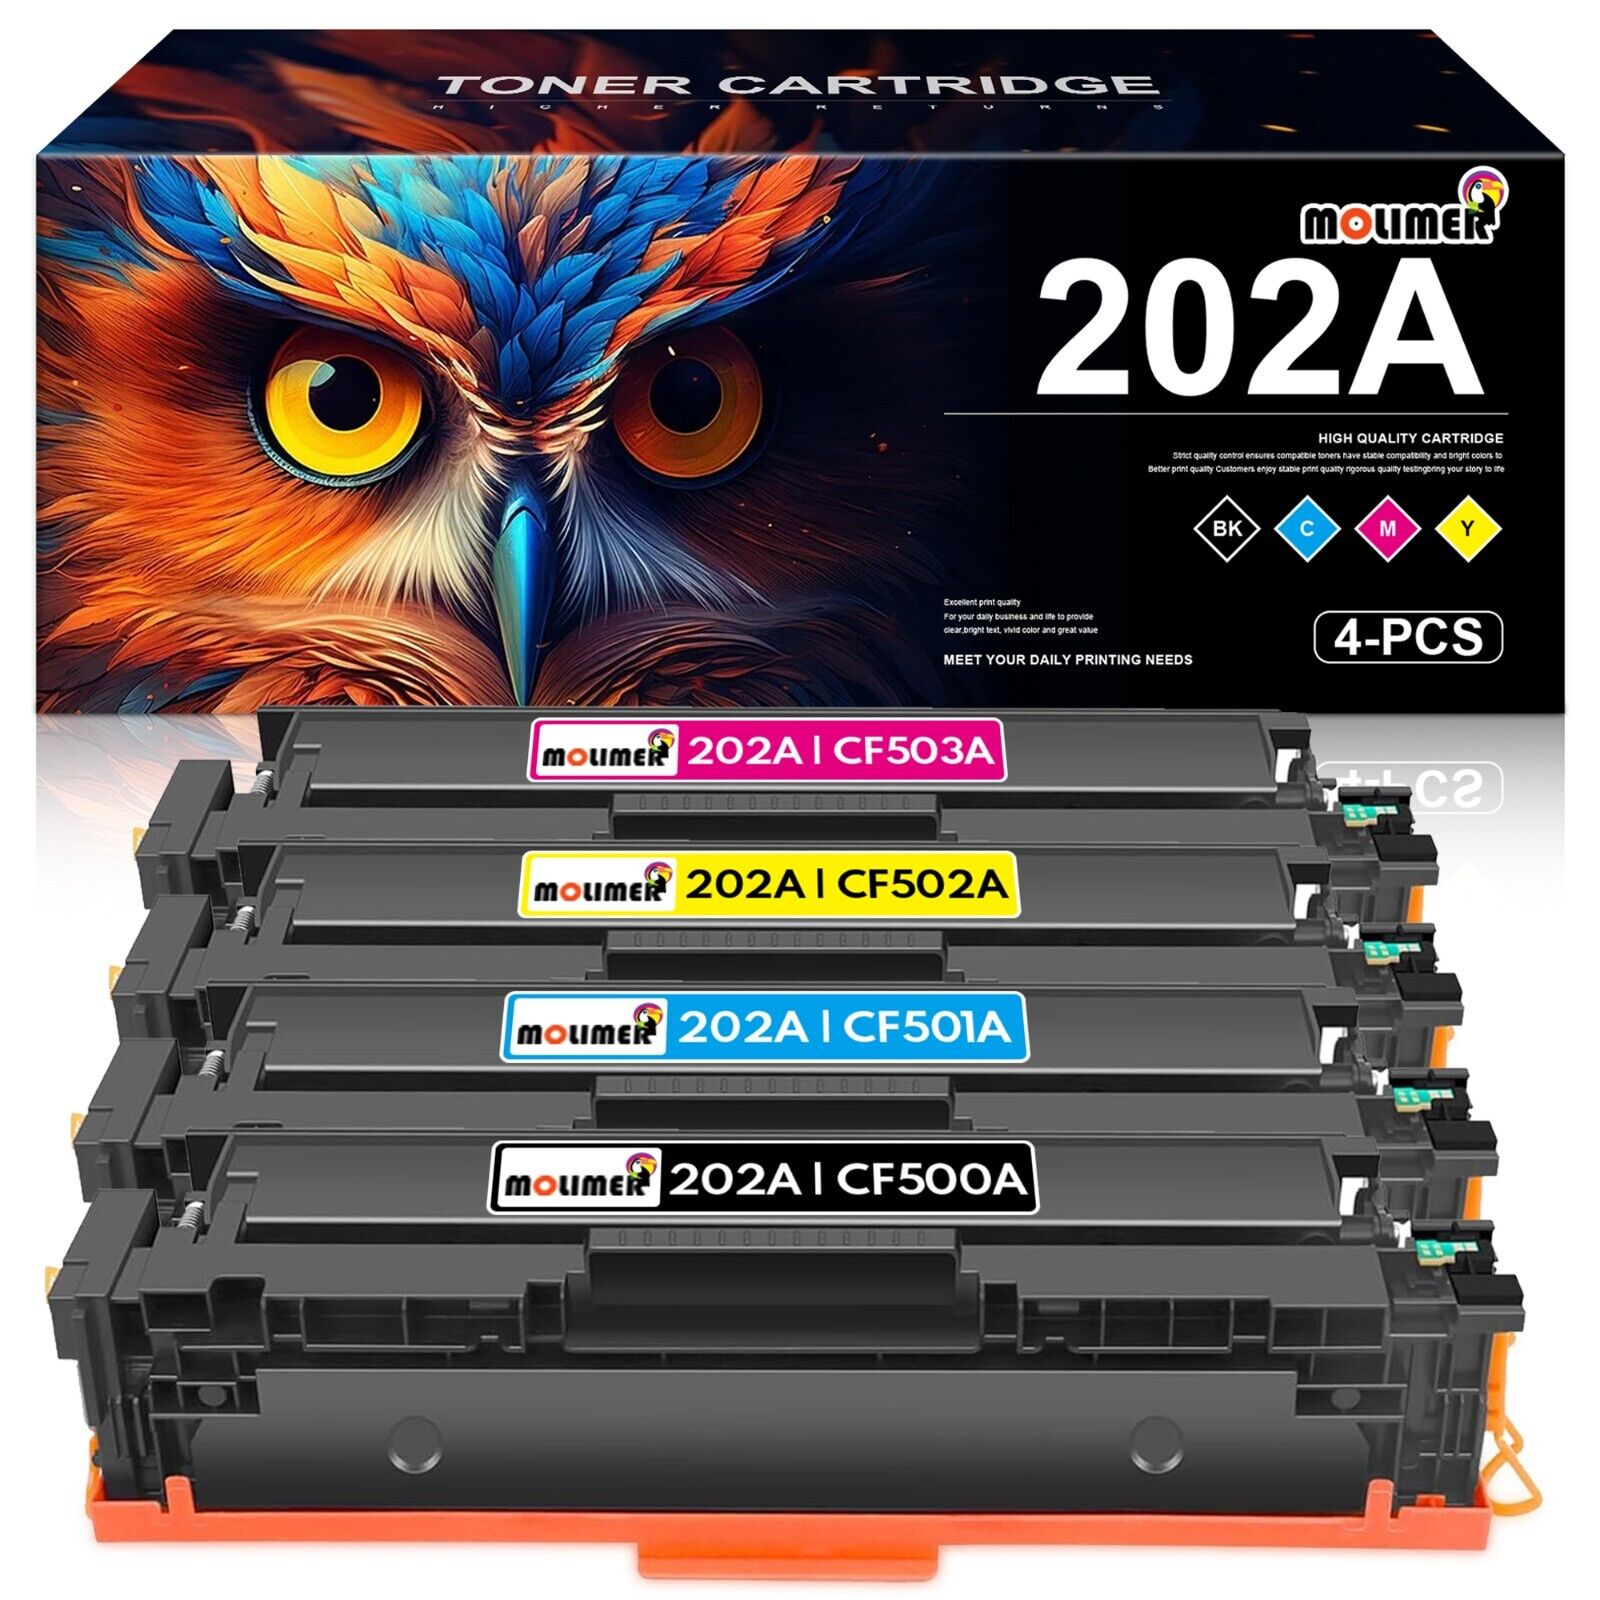 202A Toner Cartridge Color Replacement for HP Cyan Yellow M254dw M281cdw M281fdw